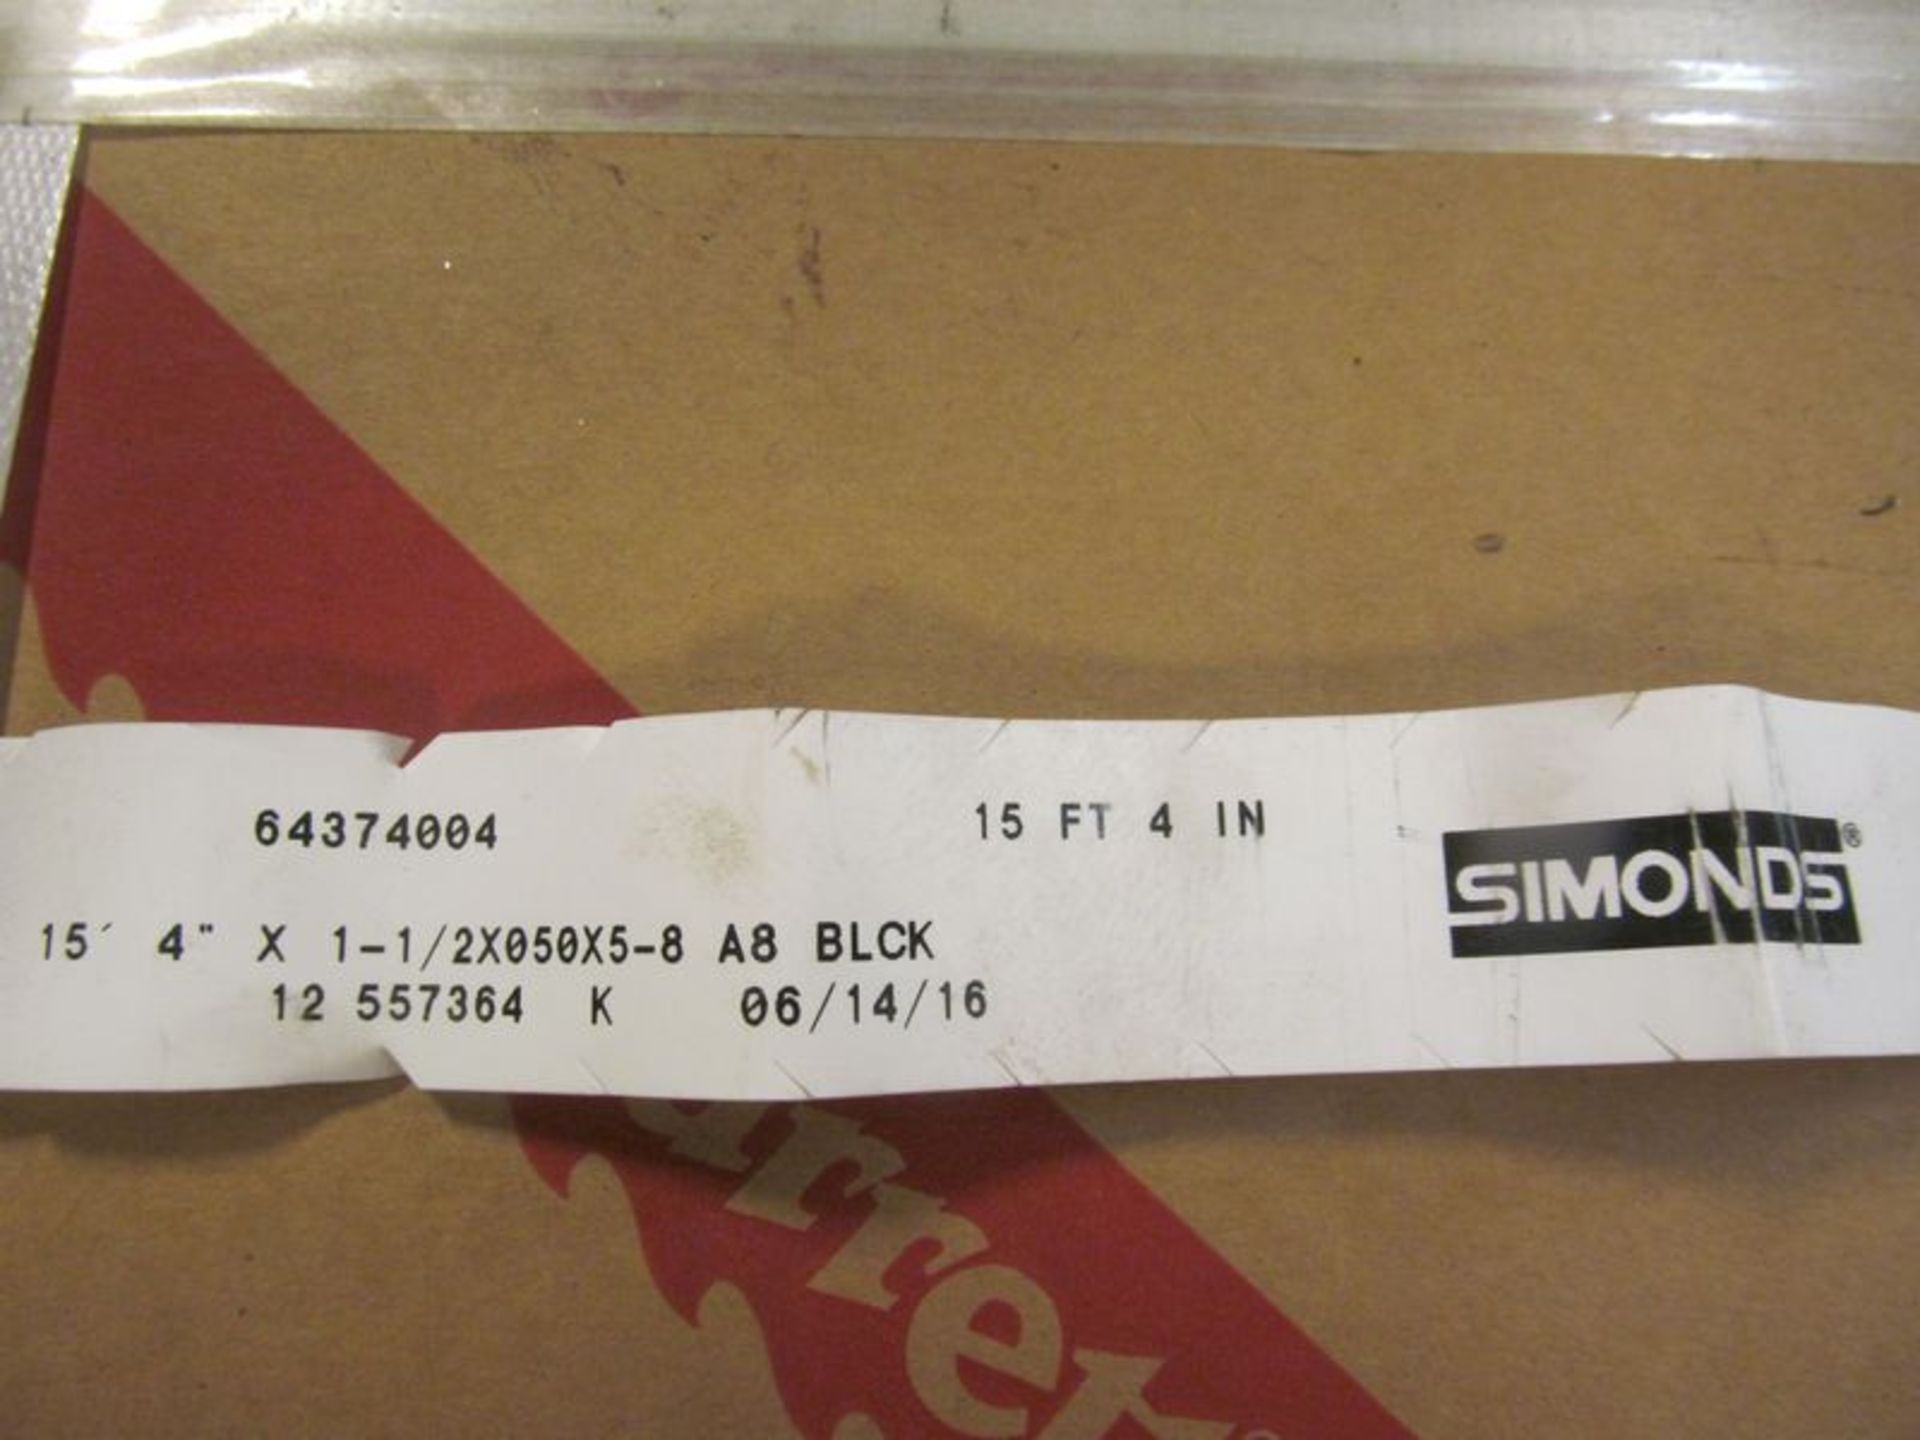 Lot of (3) Simonds saw blades, new, for C-460NC Cosen saw - 12 55>364 K, 15' 4" x 1 1/2 x 050 x 5- - Image 2 of 2